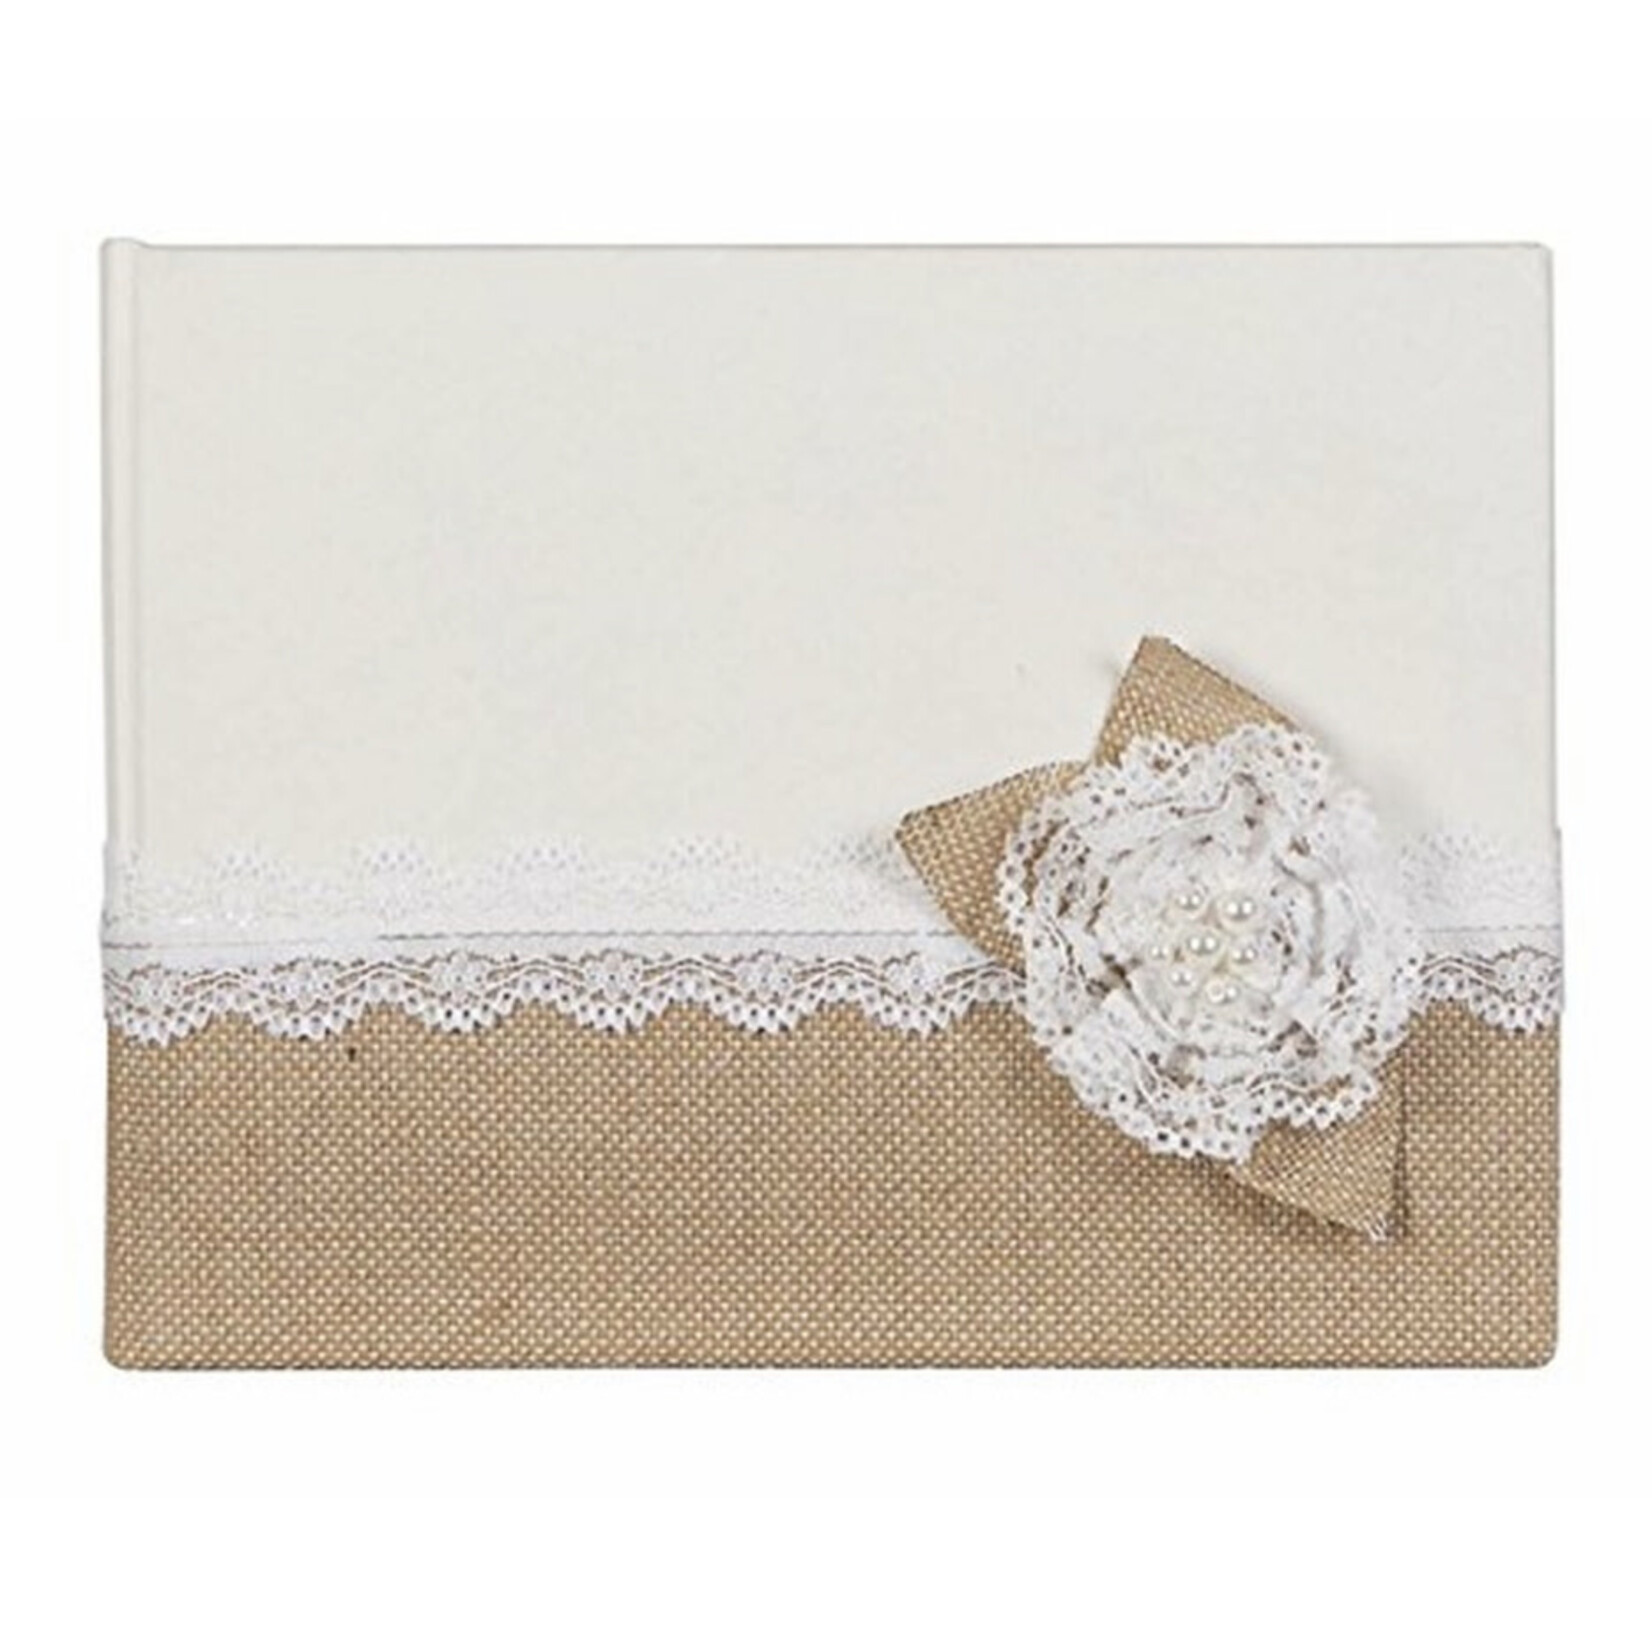 C.R. Gibson Burlap & Lace Wedding Guest Book